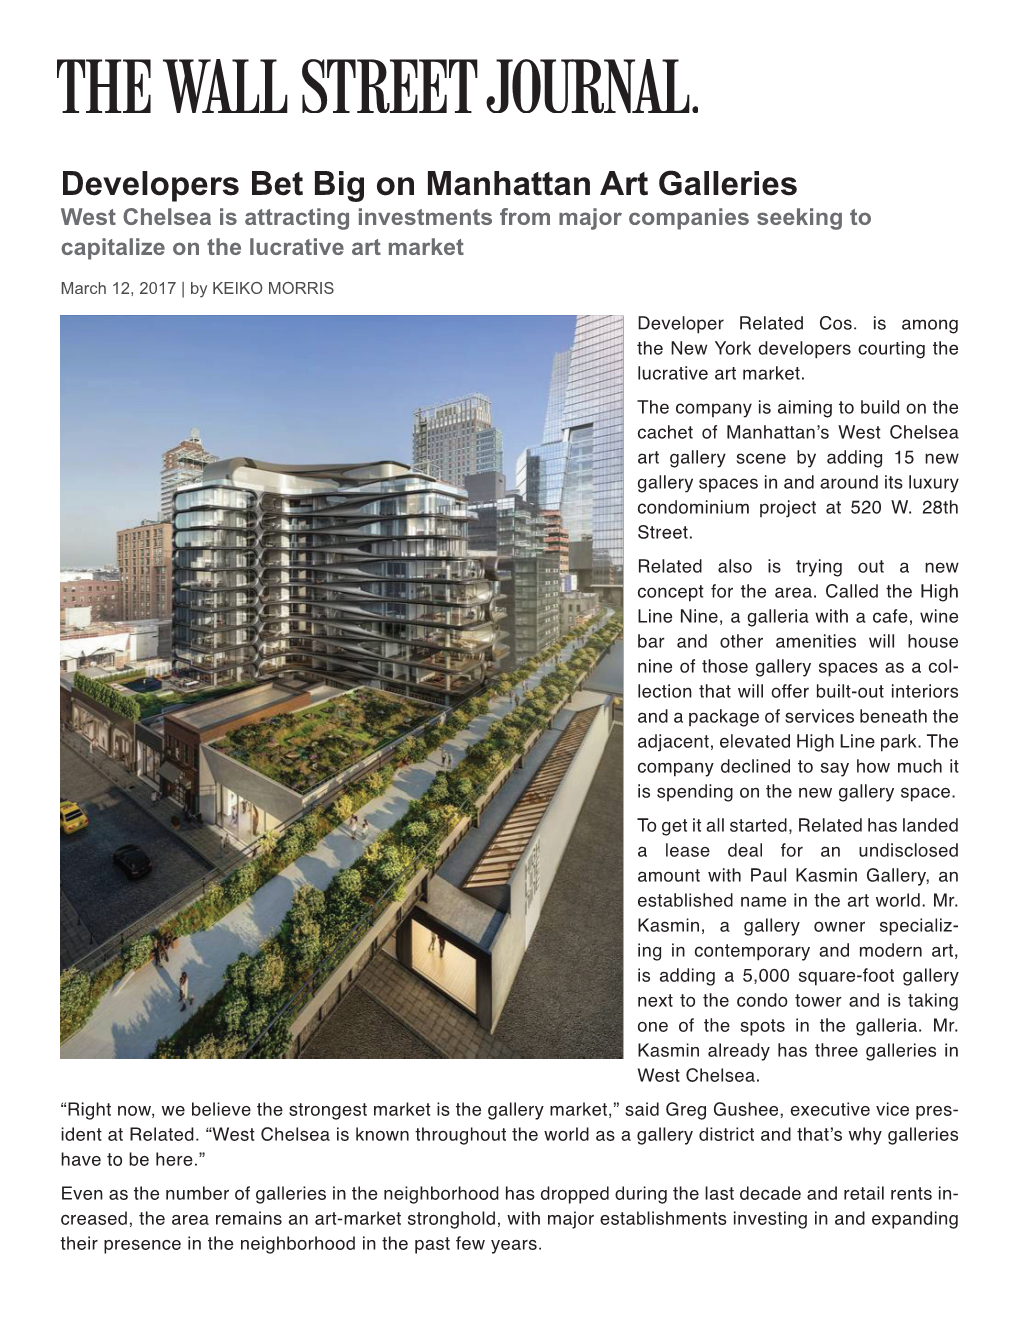 Developers Bet Big on Manhattan Art Galleries West Chelsea Is Attracting Investments from Major Companies Seeking to Capitalize on the Lucrative Art Market